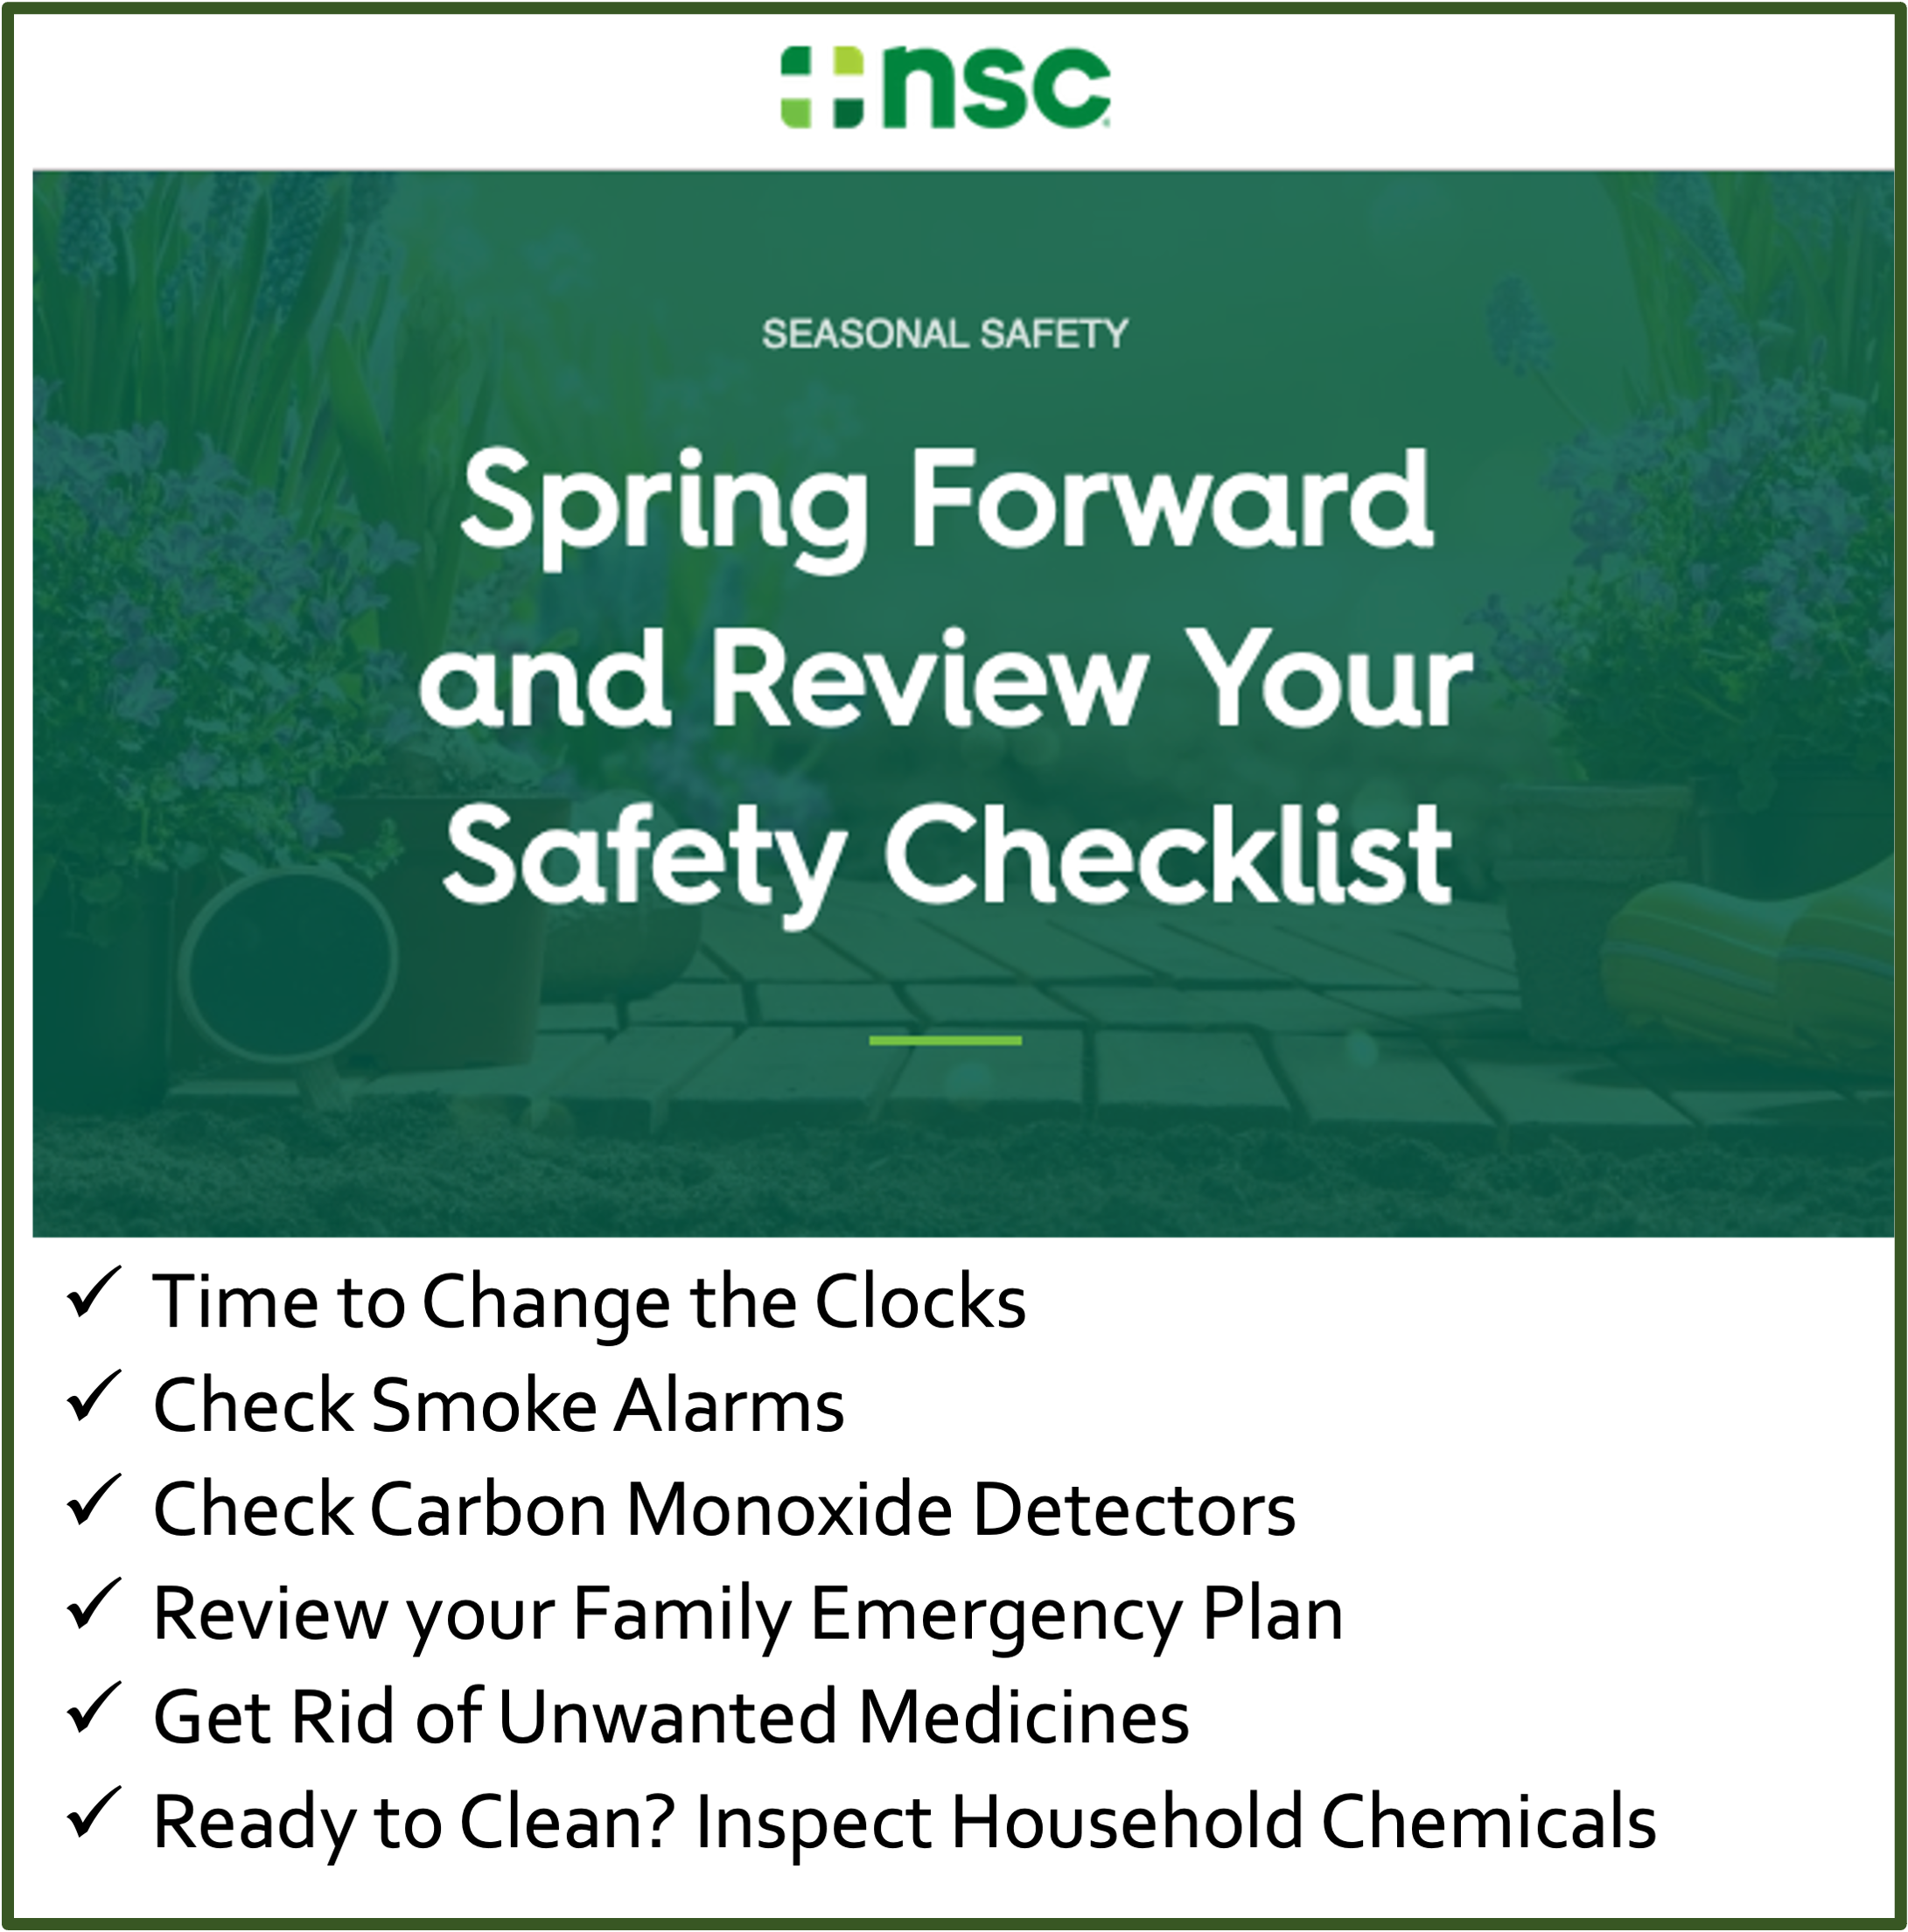 Spring Forward and Review Your Safety Checklist